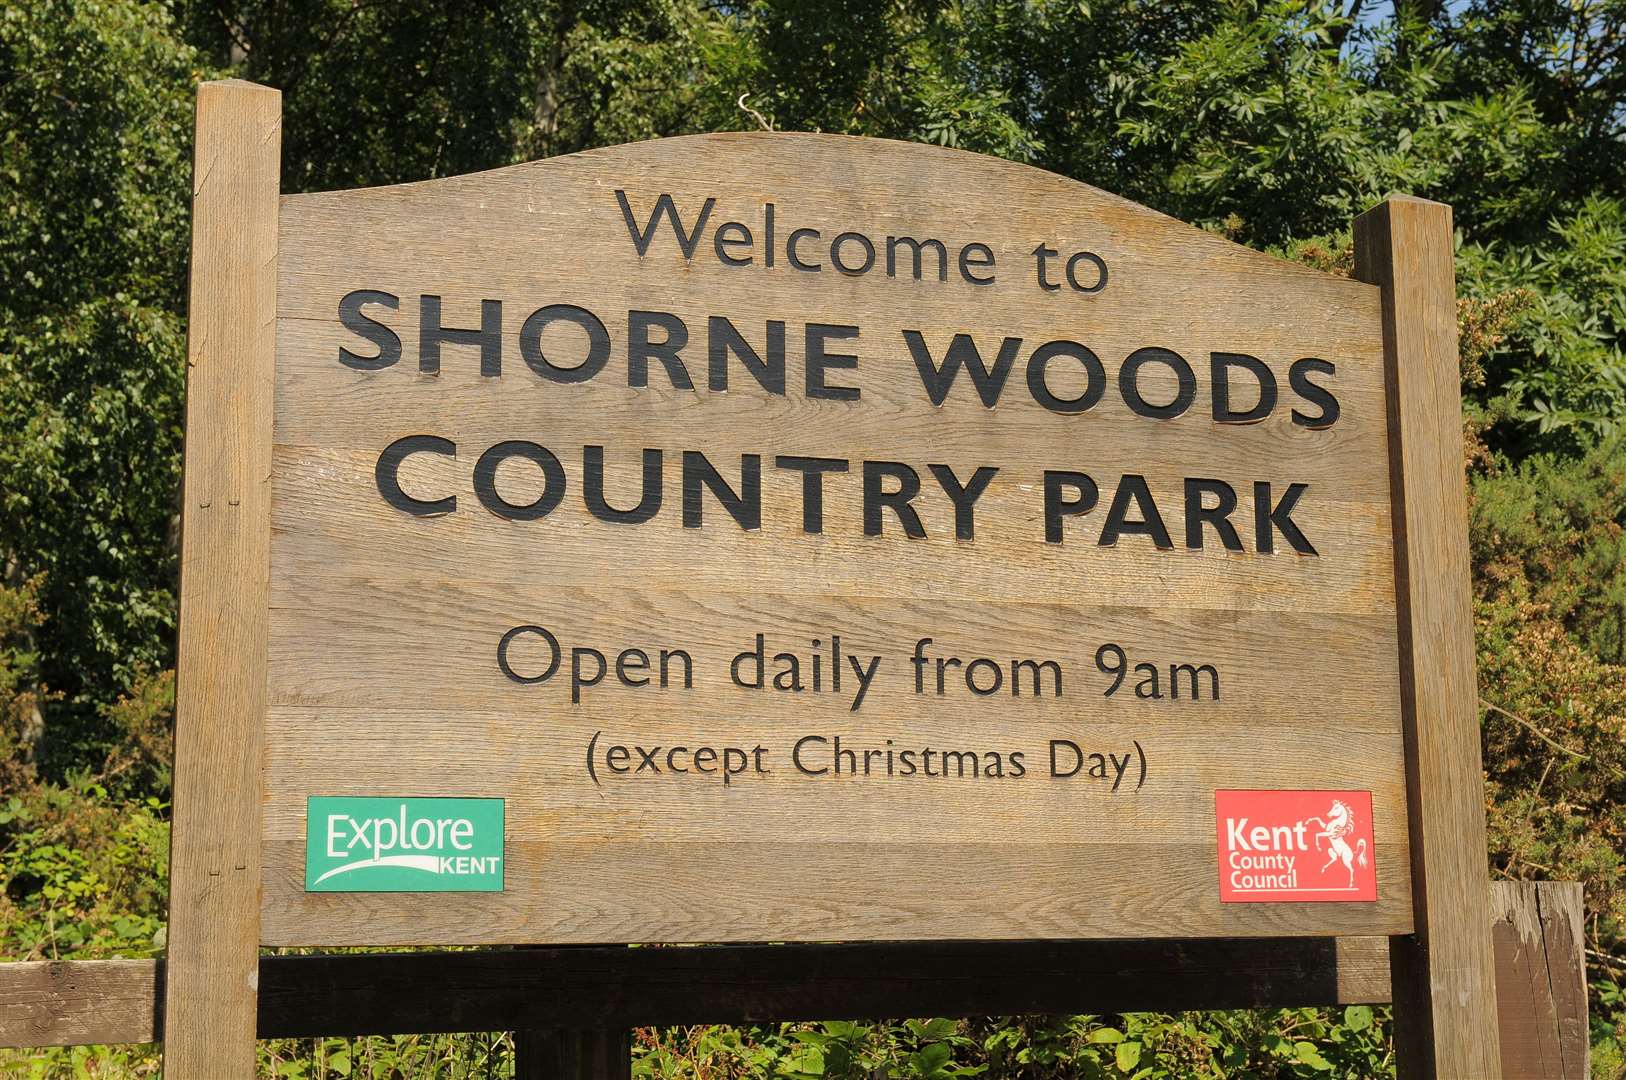 Kent County Council says it isn't yet ready to reopen play areas, including this one at Shorne